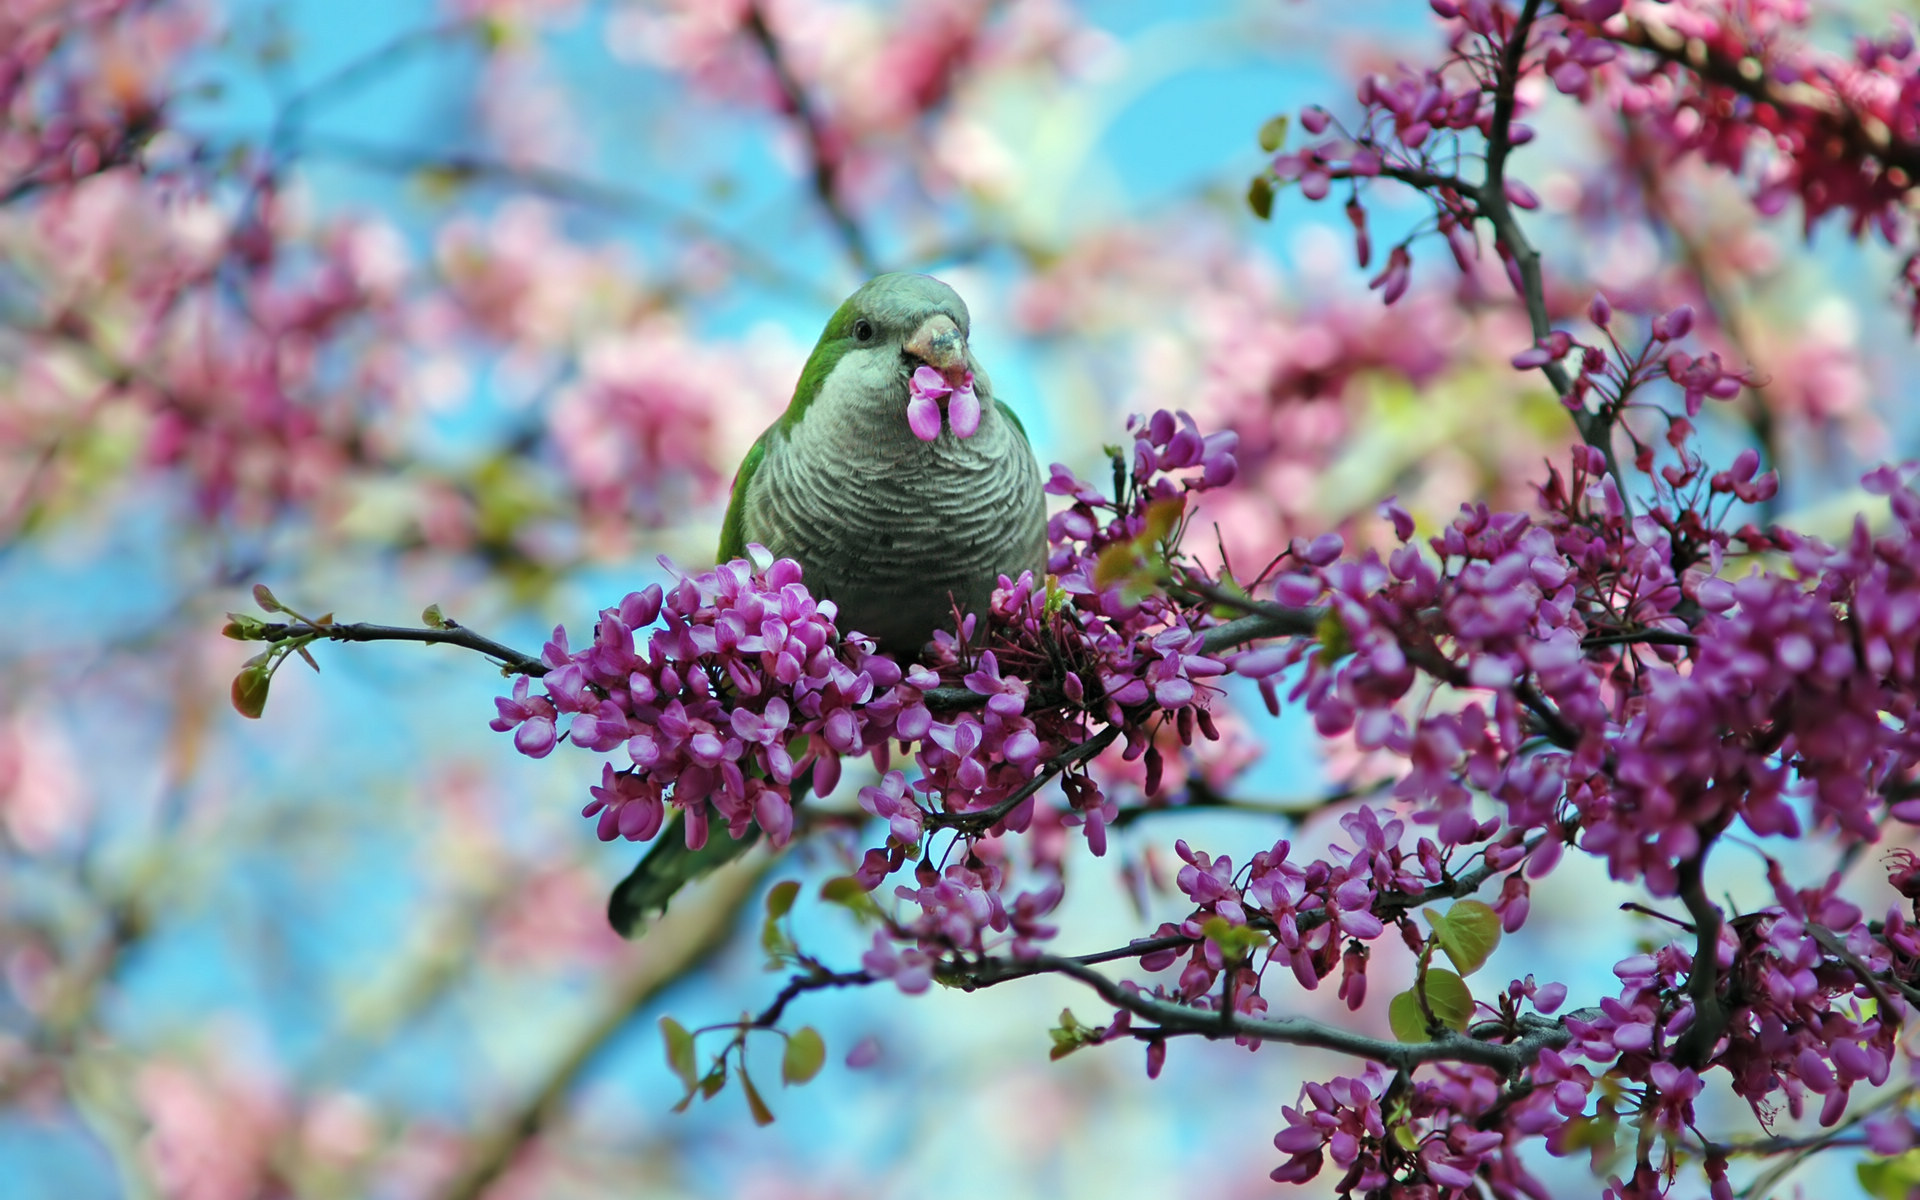 Wallpaper Photos Of Feel Spring Atmosphere All Time With Themed